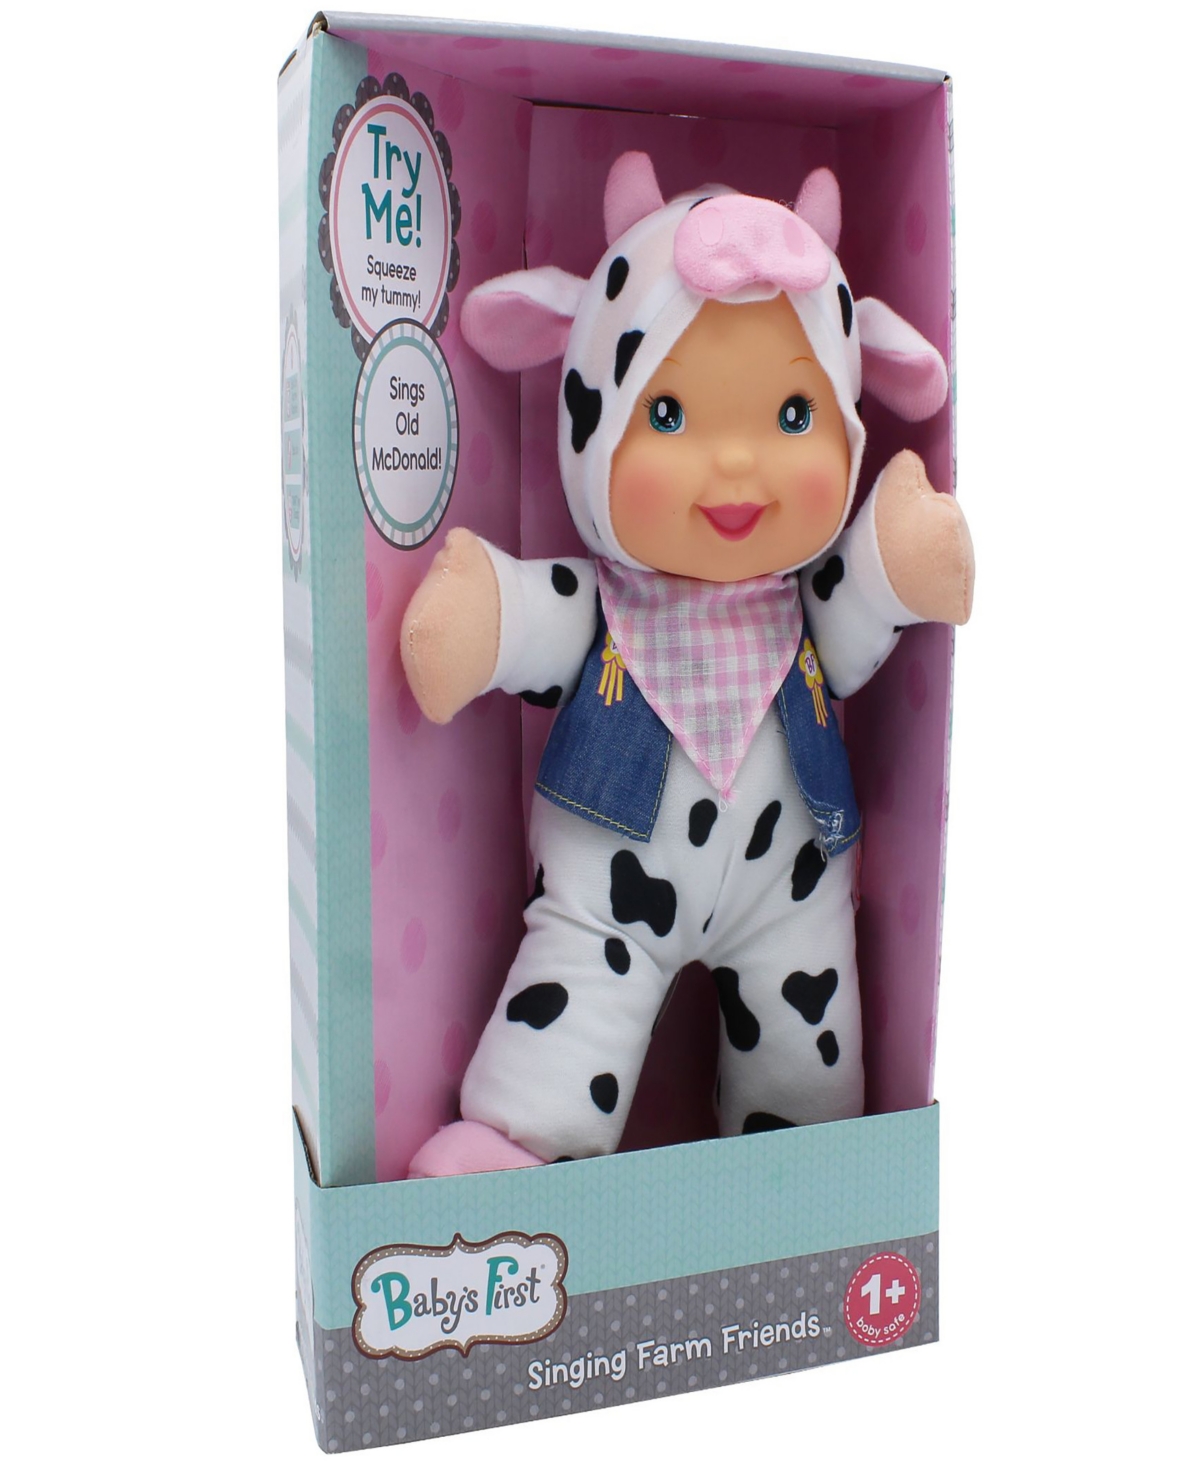 Baby's First By Nemcor Babies' Goldberger Doll Cow Singing Farm Animal Friends Cow In Multi